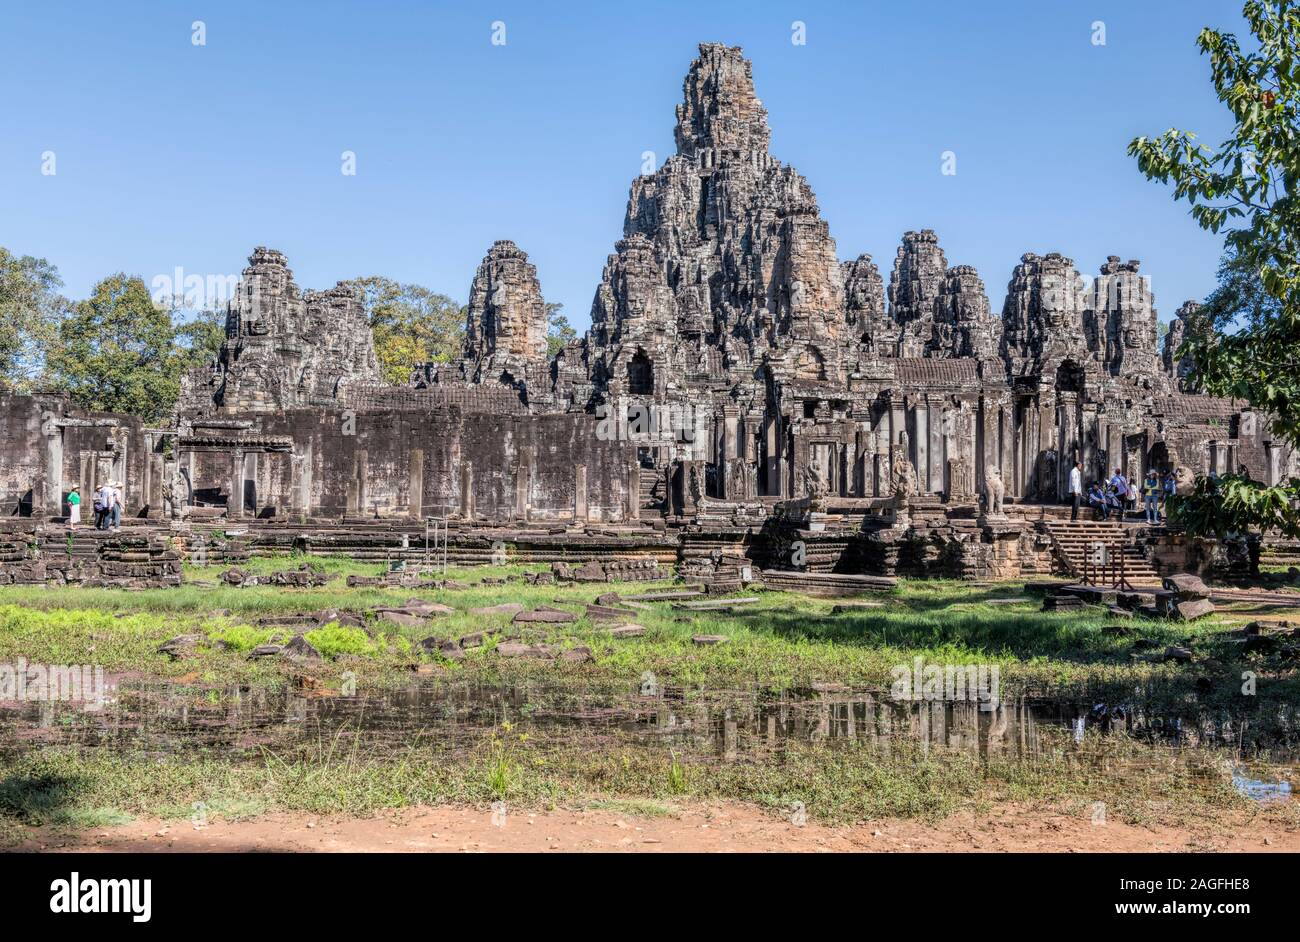 Bayon Temple Buddha statues and carvings Angkor Thom Complex Siem Reap Cambodia Stock Photo